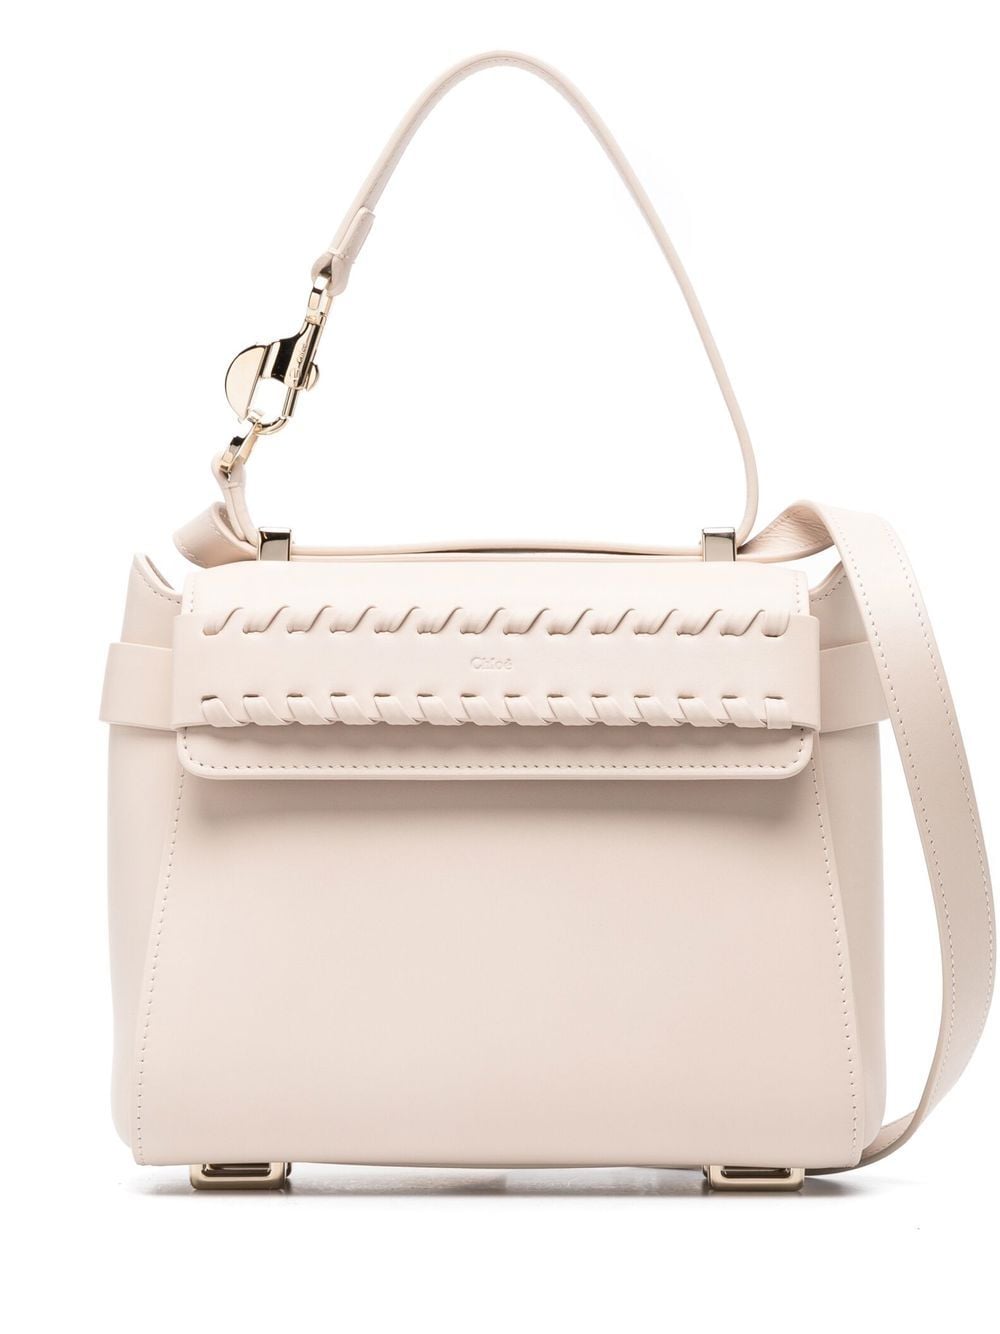 Chloé embossed-logo leather tote bag